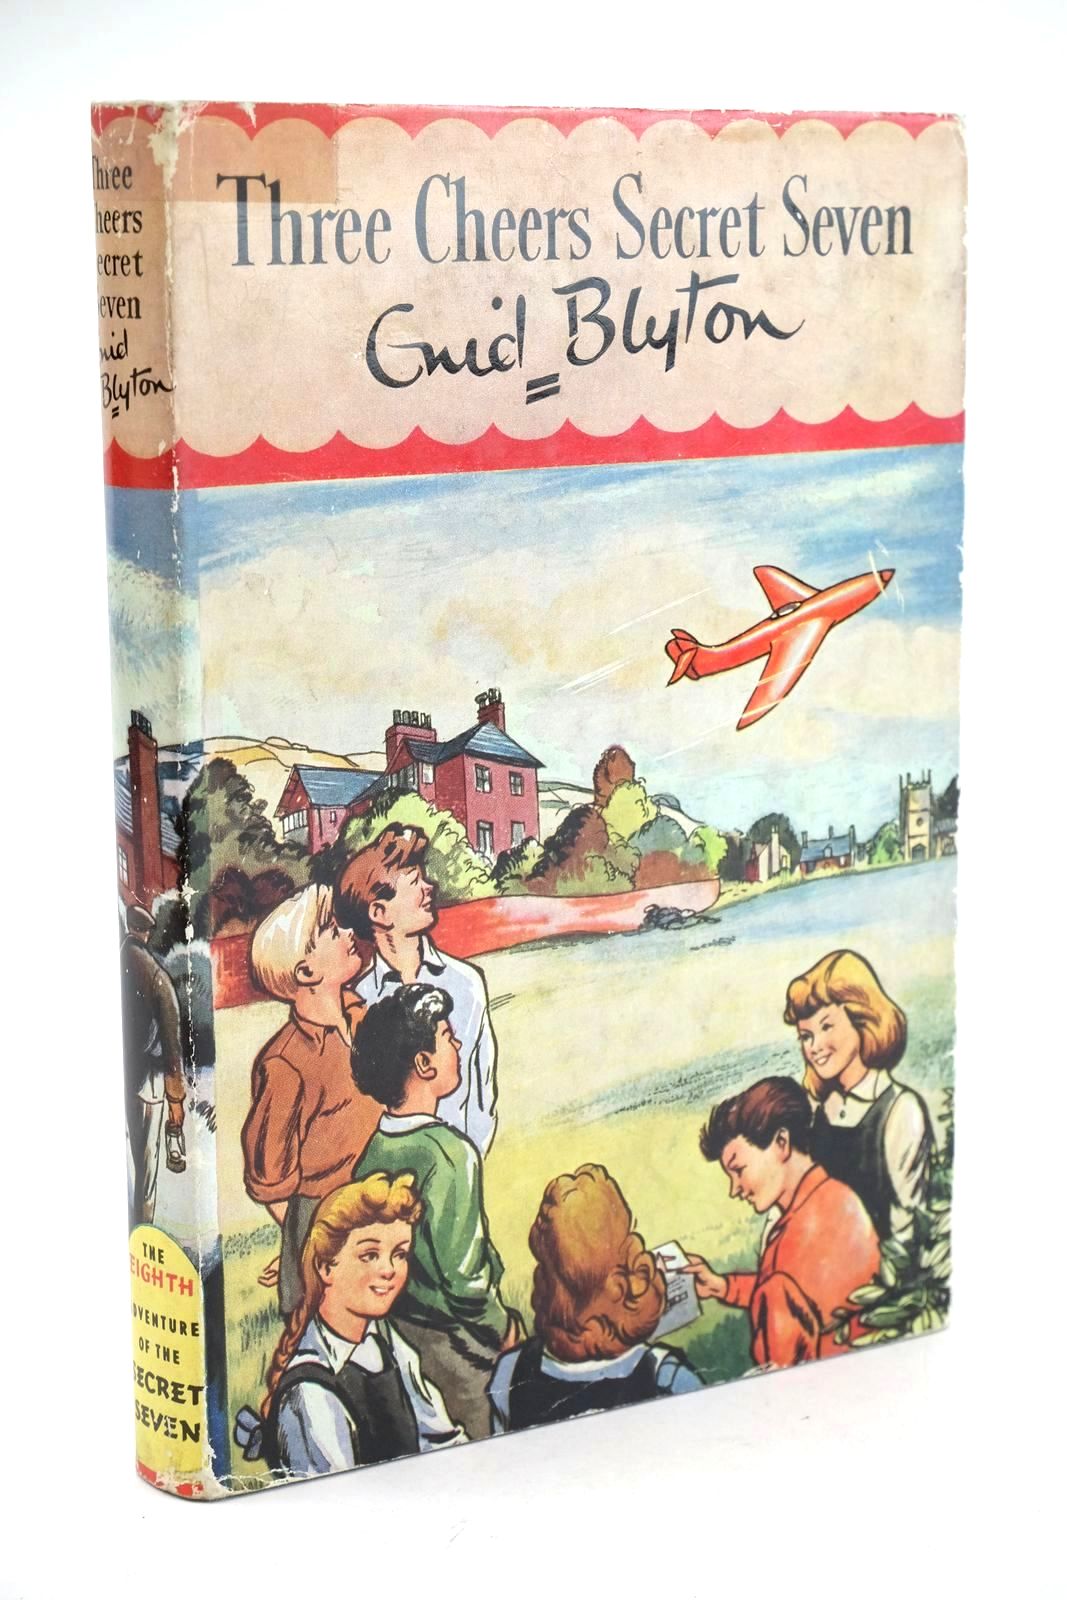 Photo of THREE CHEERS SECRET SEVEN written by Blyton, Enid illustrated by Sharrocks, Burgess published by Brockhampton Press (STOCK CODE: 1324546)  for sale by Stella & Rose's Books